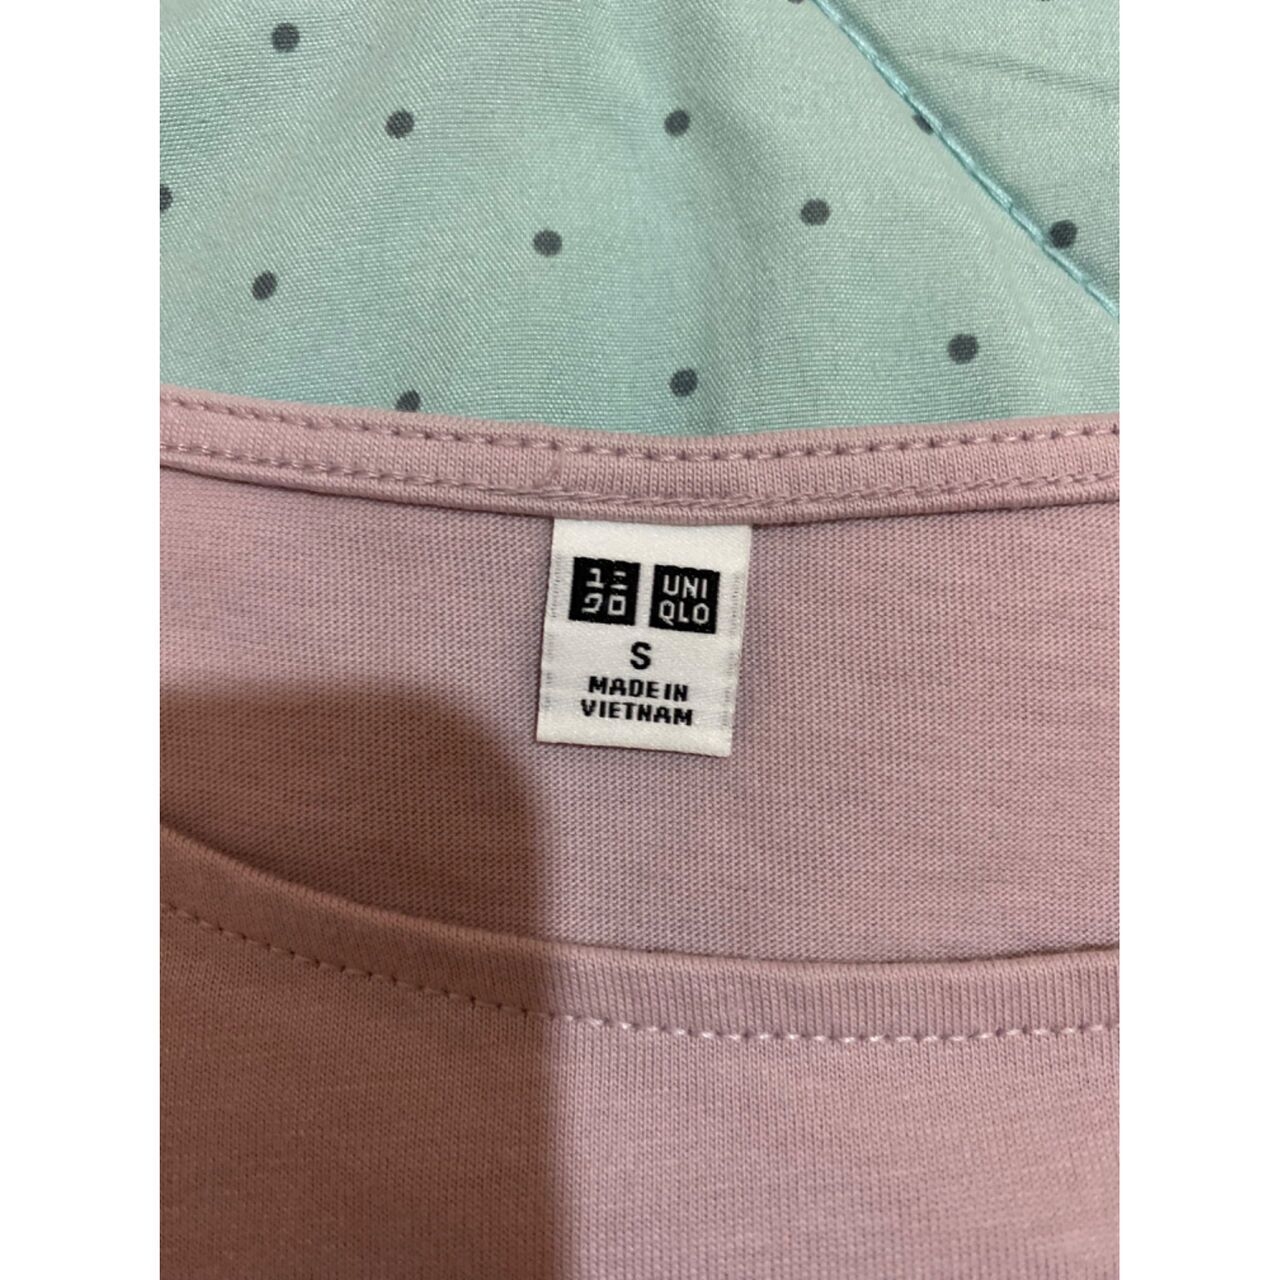 UNIQLO Dusty Pink Blouse